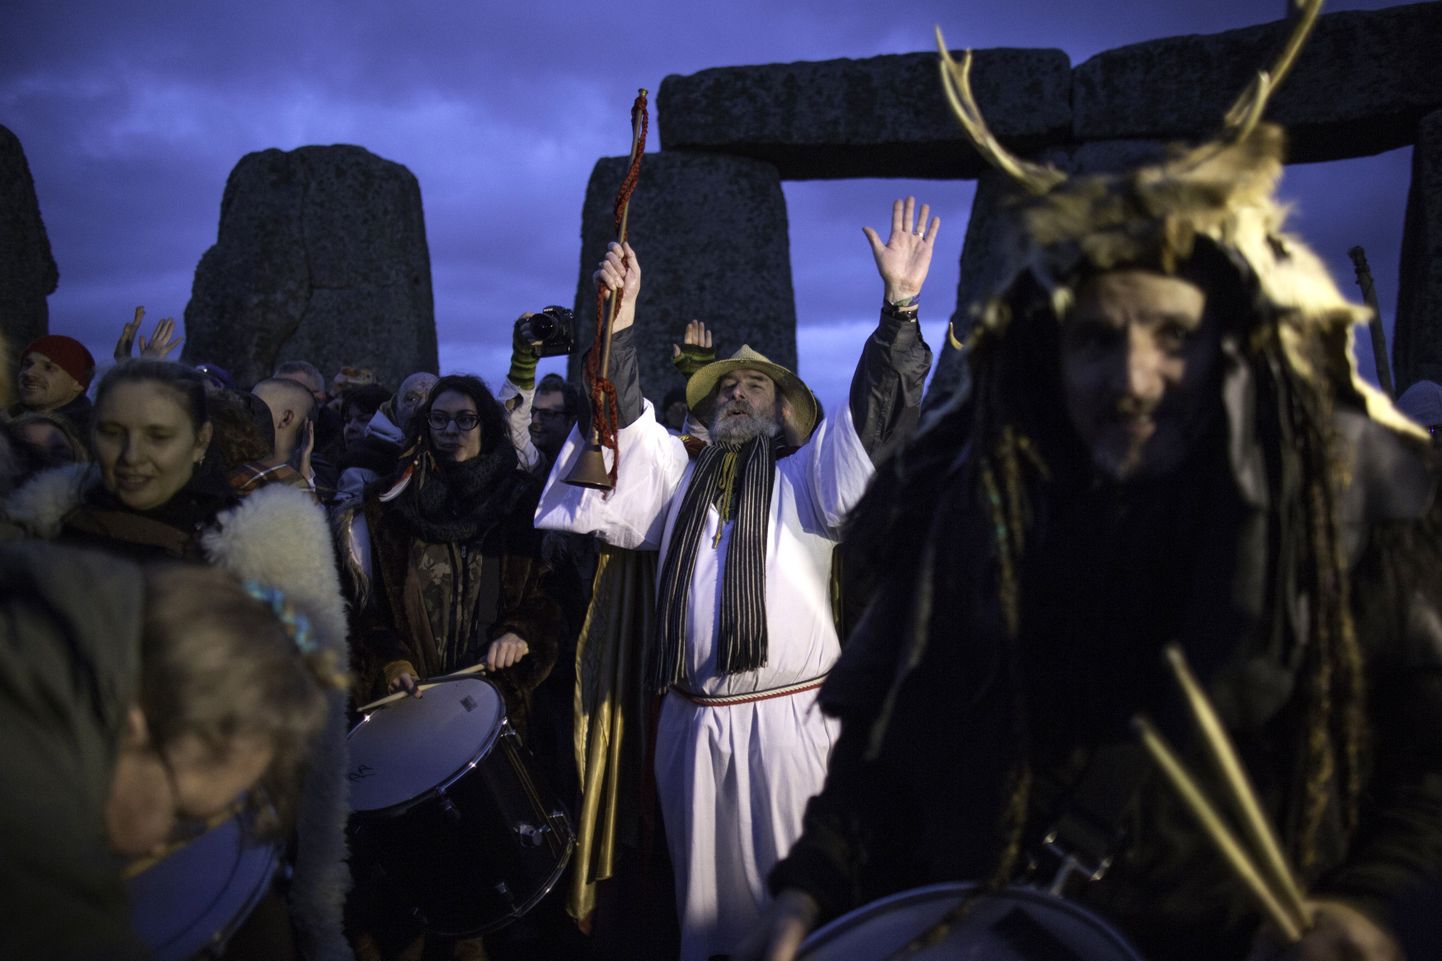 Revellers celebrate the winter solstice at Stonehenge on Salisbury Plain in southern England December 22, 2015. Stonehenge is a celebrated venue of festivities during the winter solstice - the shortest day of the year in the northern hemisphere - and it attracts thousands of revellers, spiritualists and tourists. Druids, a pagan religious order dating back to Celtic Britain, believe Stonehenge was a centre of spiritualism more than 2,000 years ago.  REUTERS/Kieran Doherty TPX IMAGES OF THE DAY